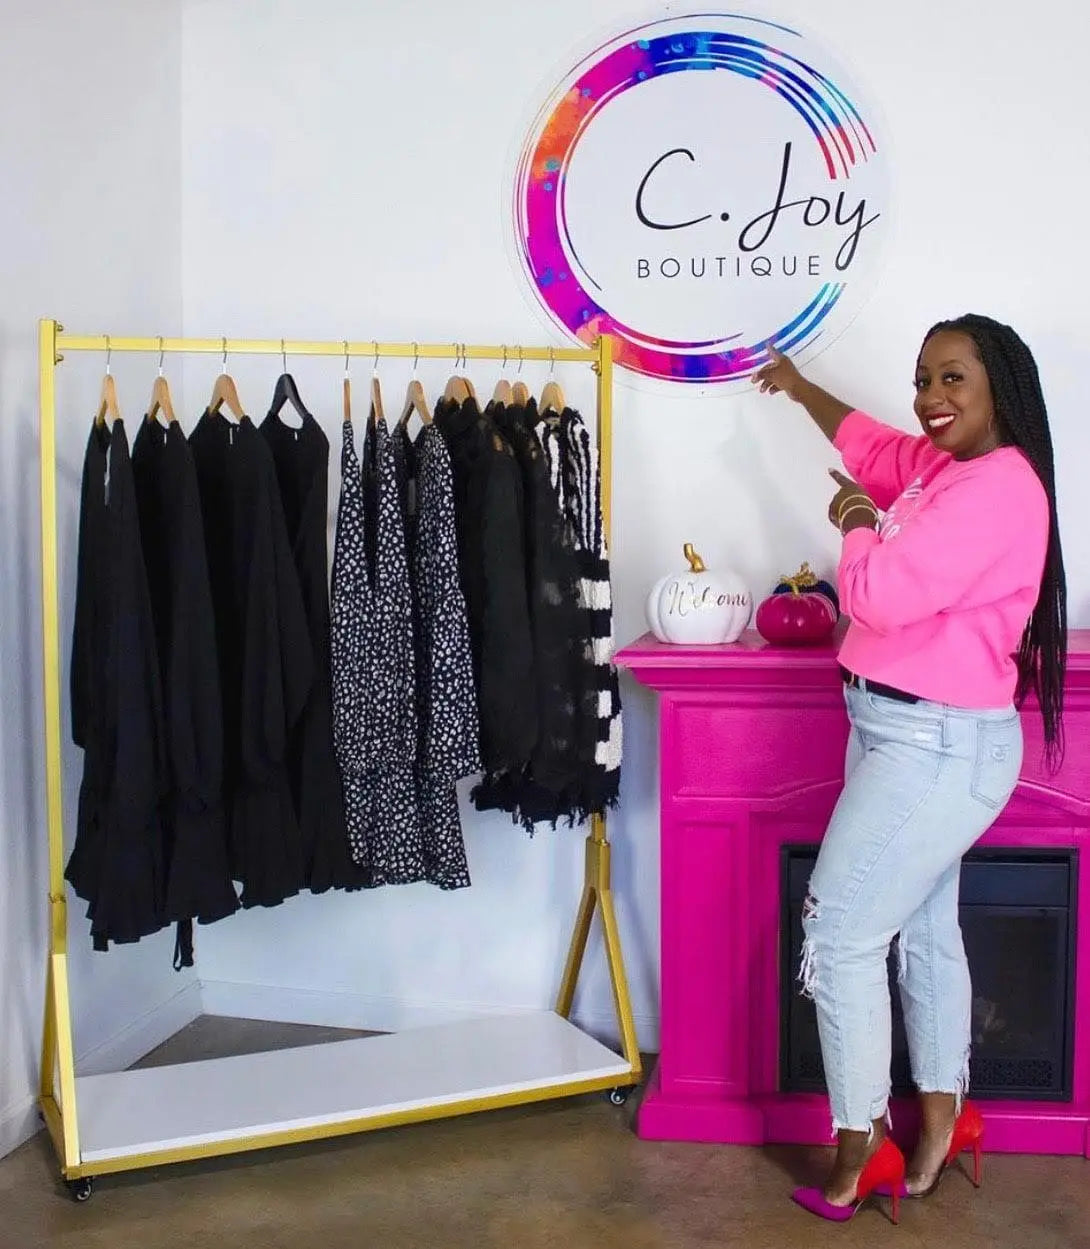 Female business owner smiling and pointing to her business logo sign in her boutique store.